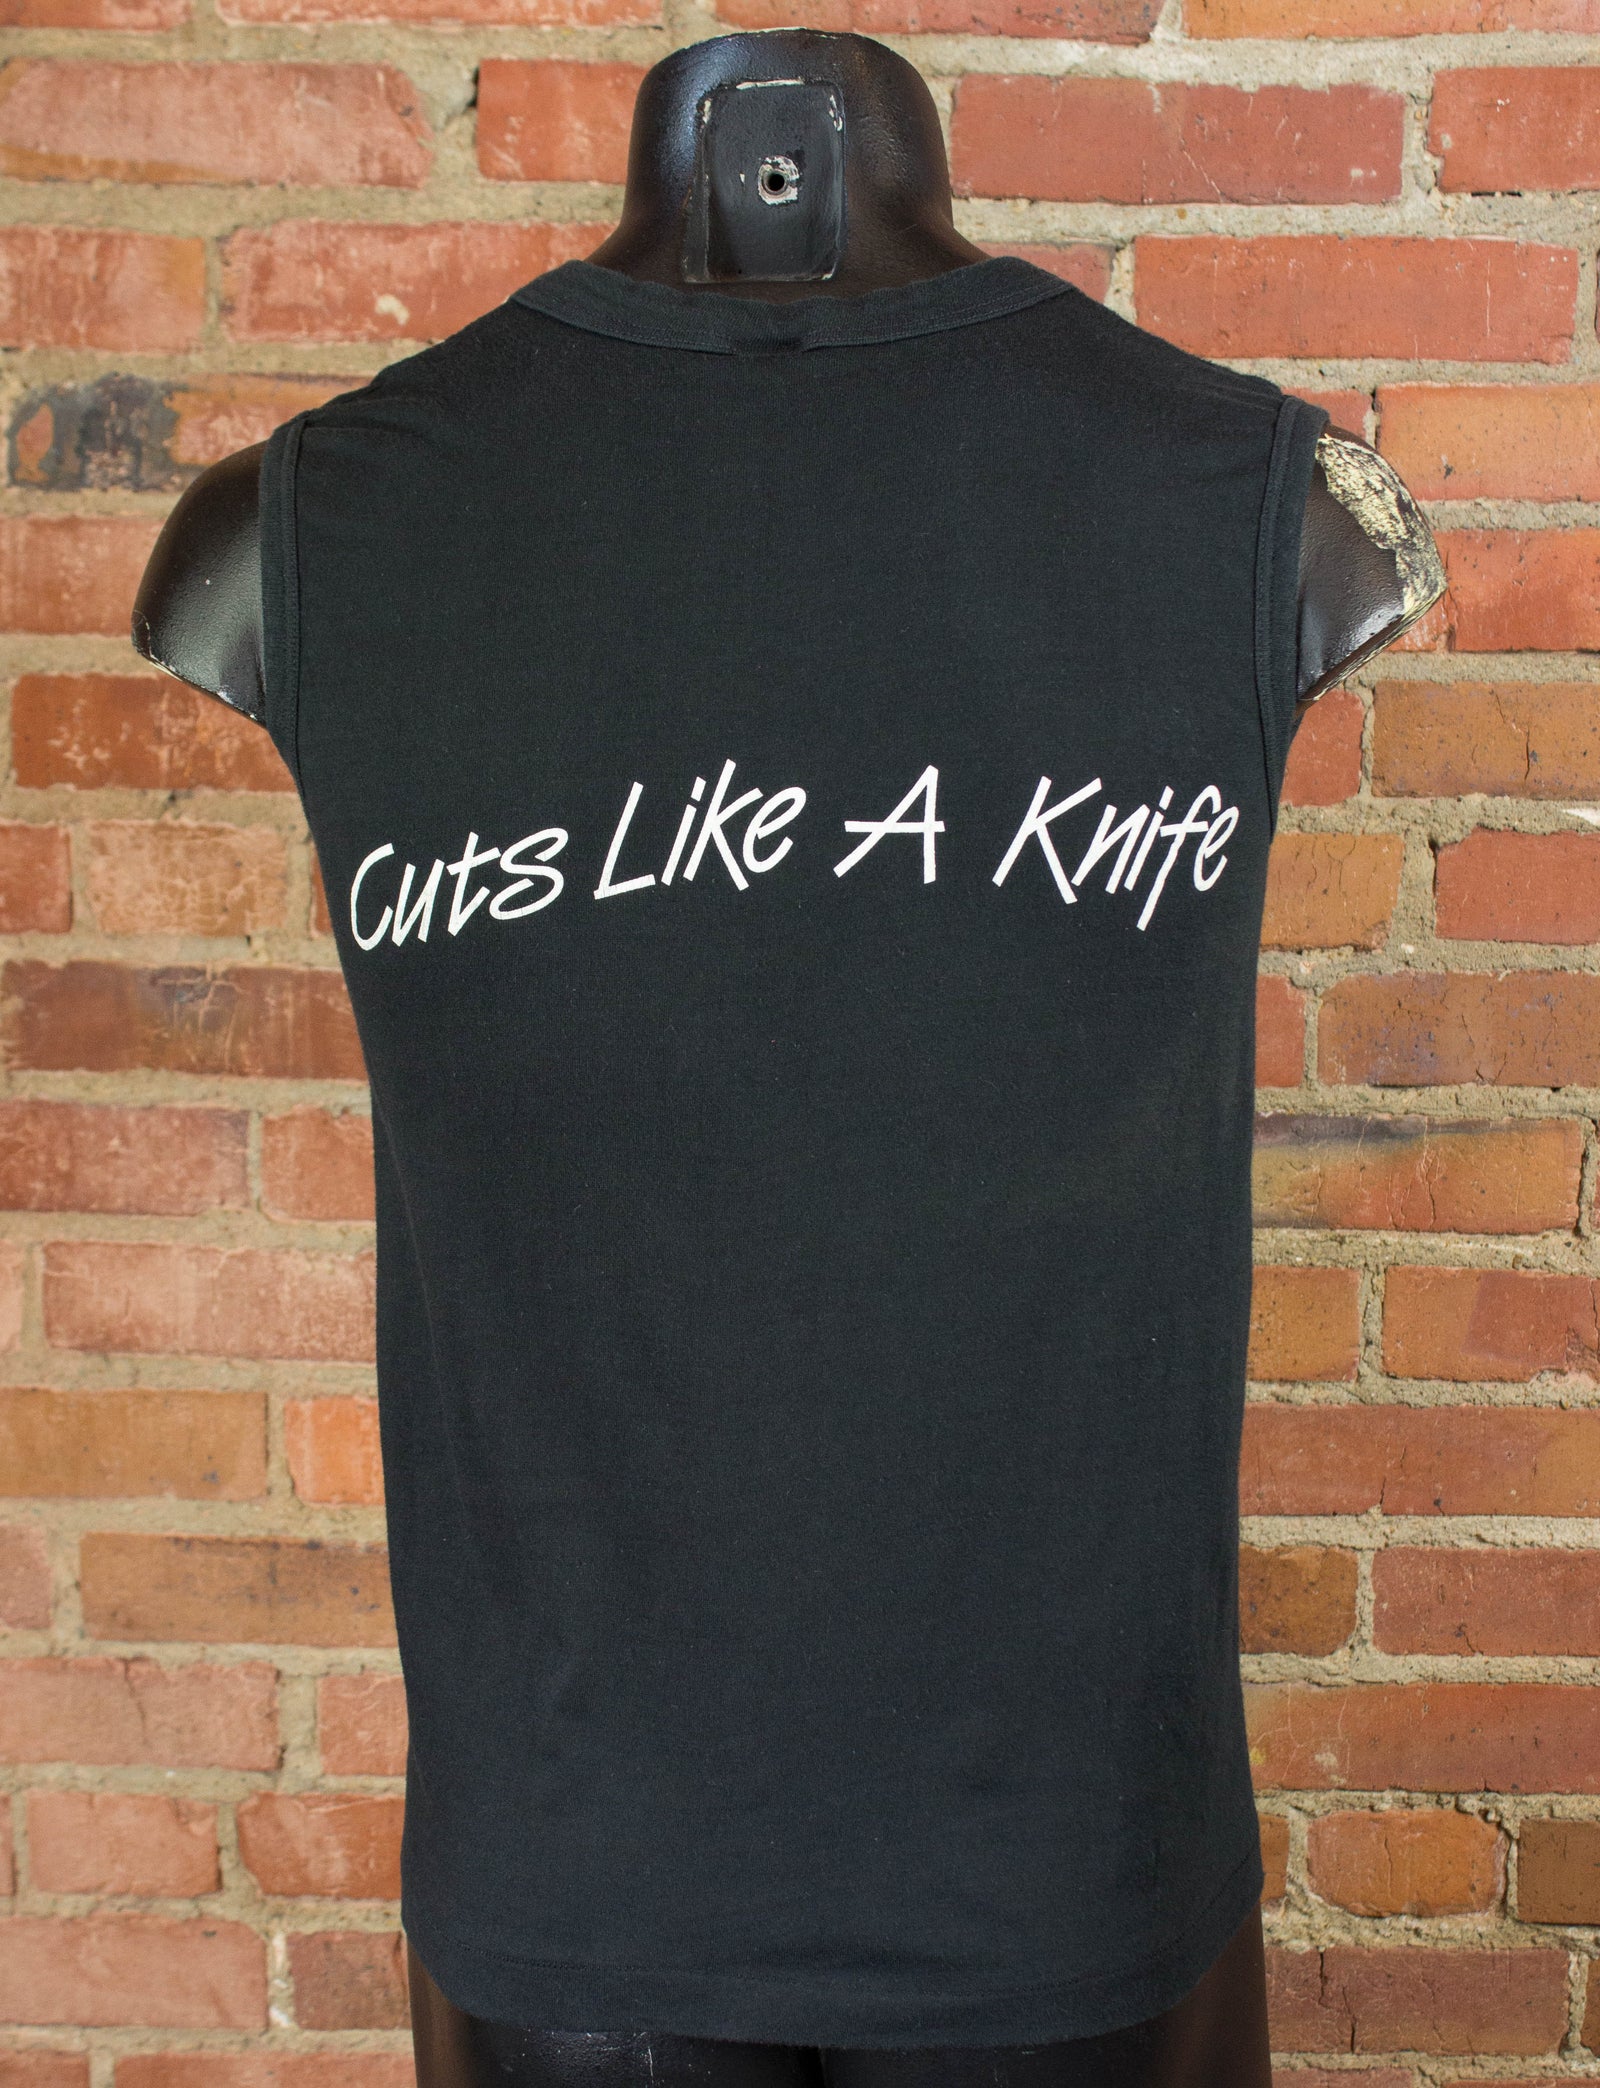 Vintage Bryan Adams 1983 Cuts Like A Knife Black and Pink Muscle Tee Concert T Shirt Unisex Small